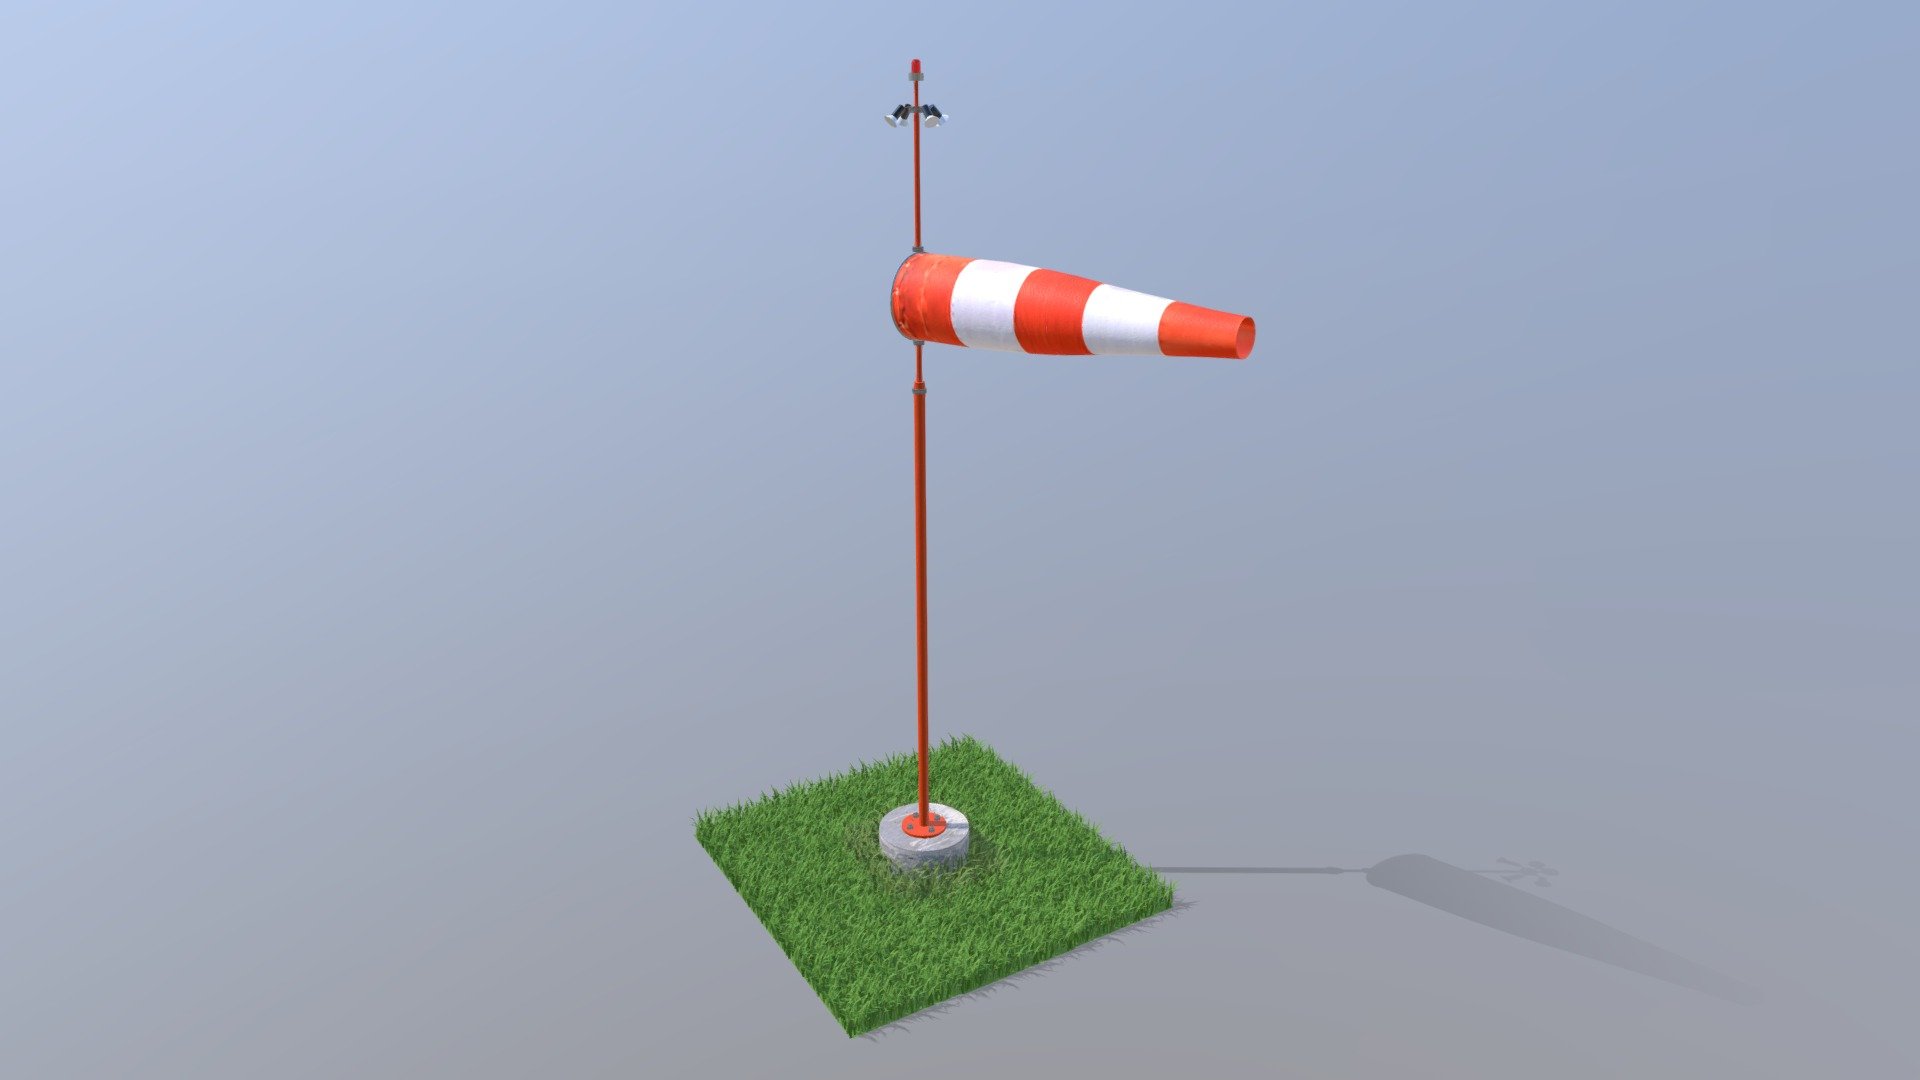 An animated windscock.

Using MassFX cloth simulation, gravity and wind to animate the sock fluttering in the wind.

Medium-poly model using medium to 2k texture maps. Created and animated in 3ds Max, exported to Alembic (ABC). Part of my Airport collection: https://skfb.ly/6JyCC - Windsock Animation - 3D model by Kanedog (@Kane33) 3d model